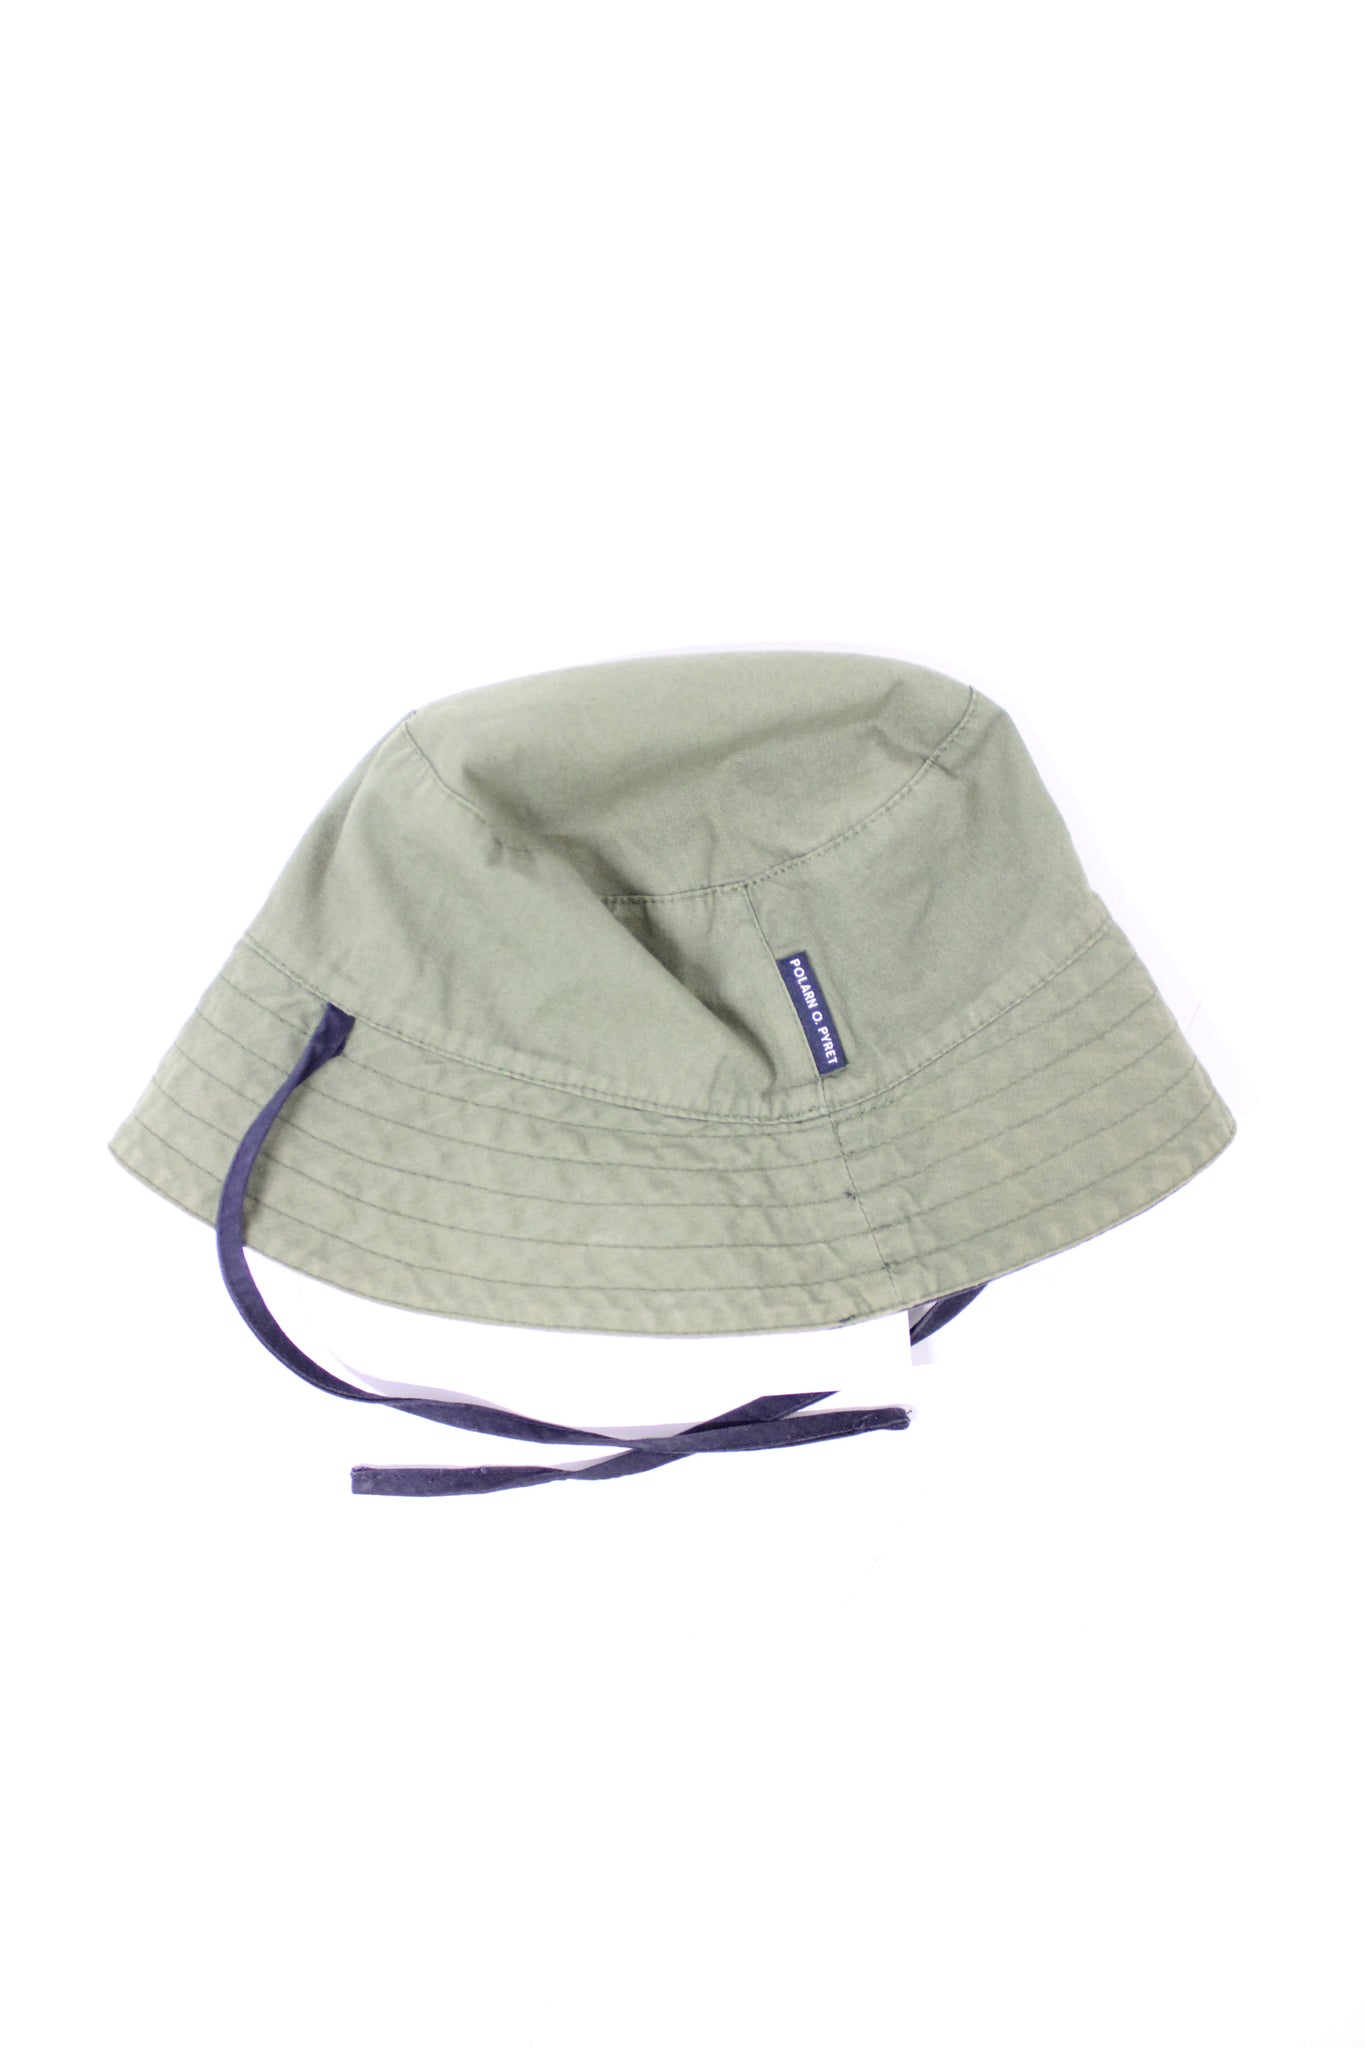 Kids Sun Hat One Size / One Size